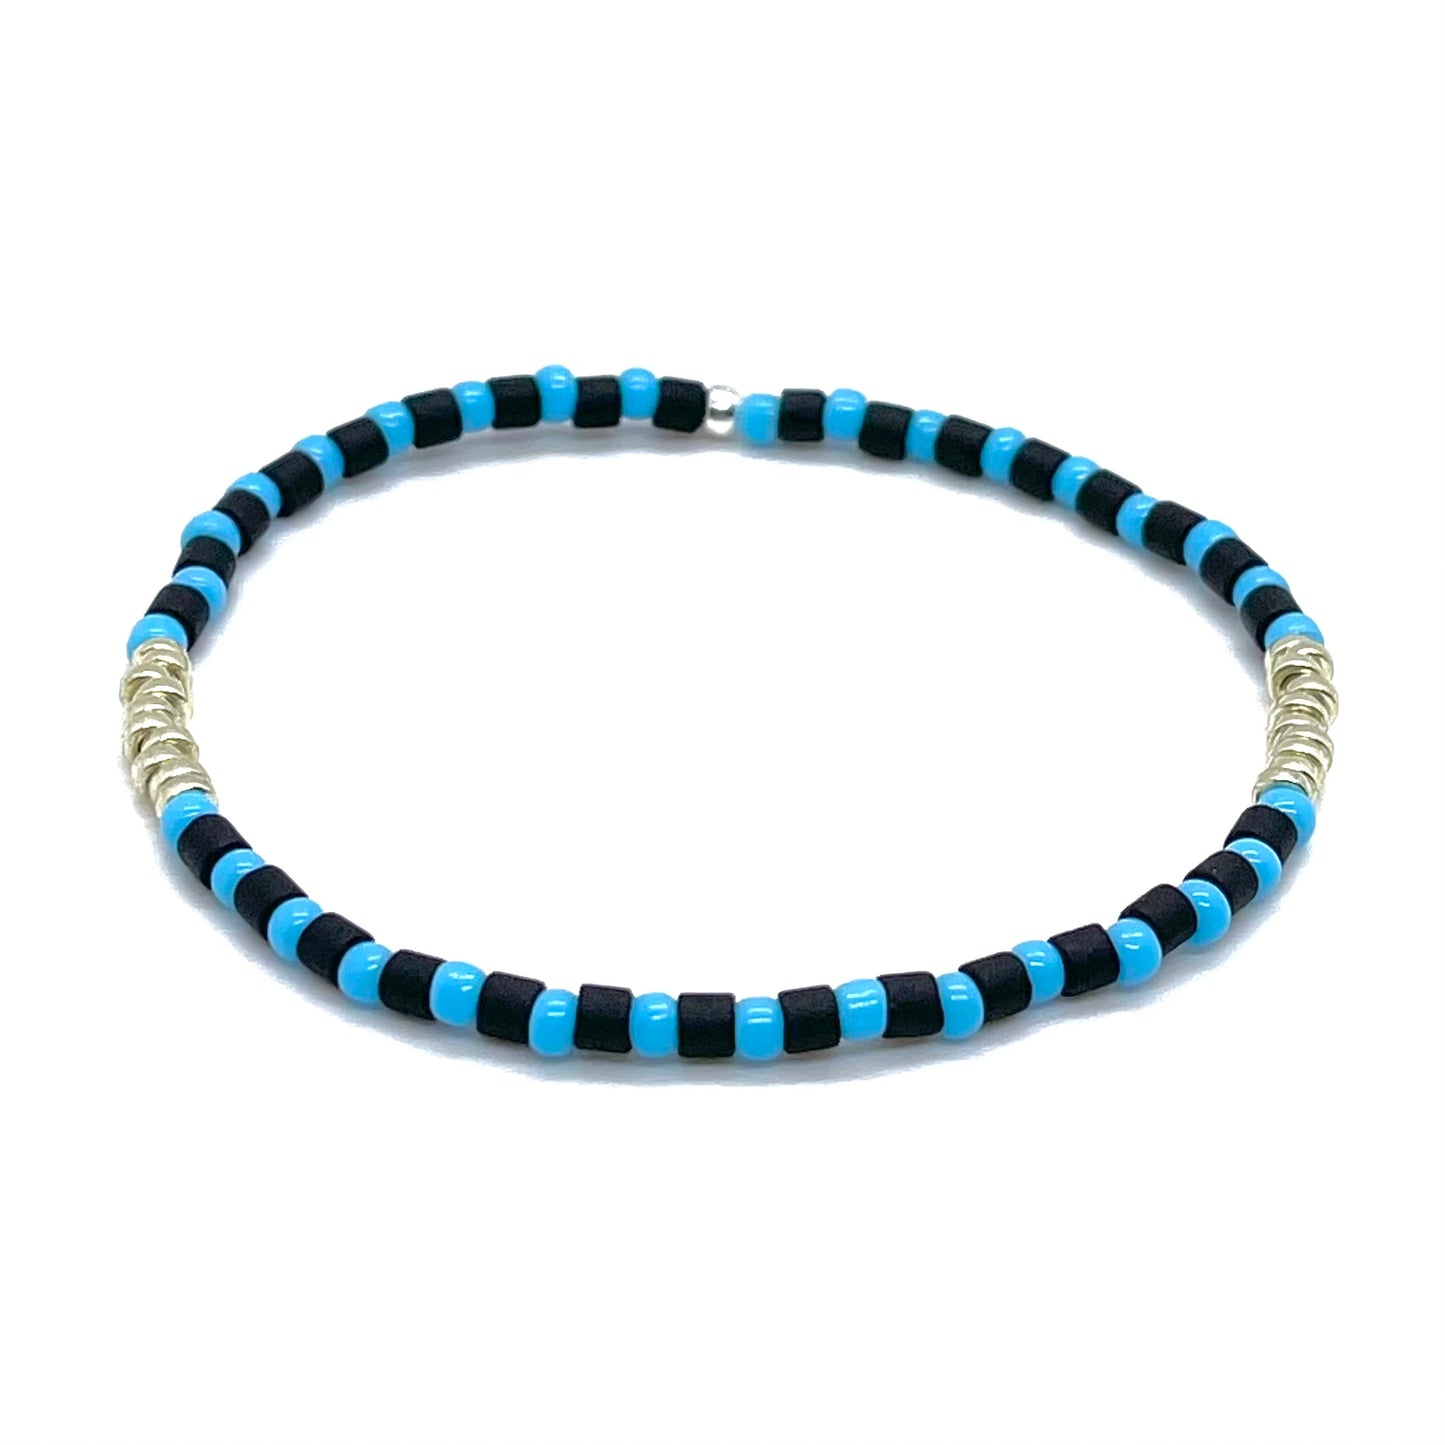 Mens black and light blue bracelet with tube and round shaped glass seed beads and silver-tone accent disks on elastic stretch cord.